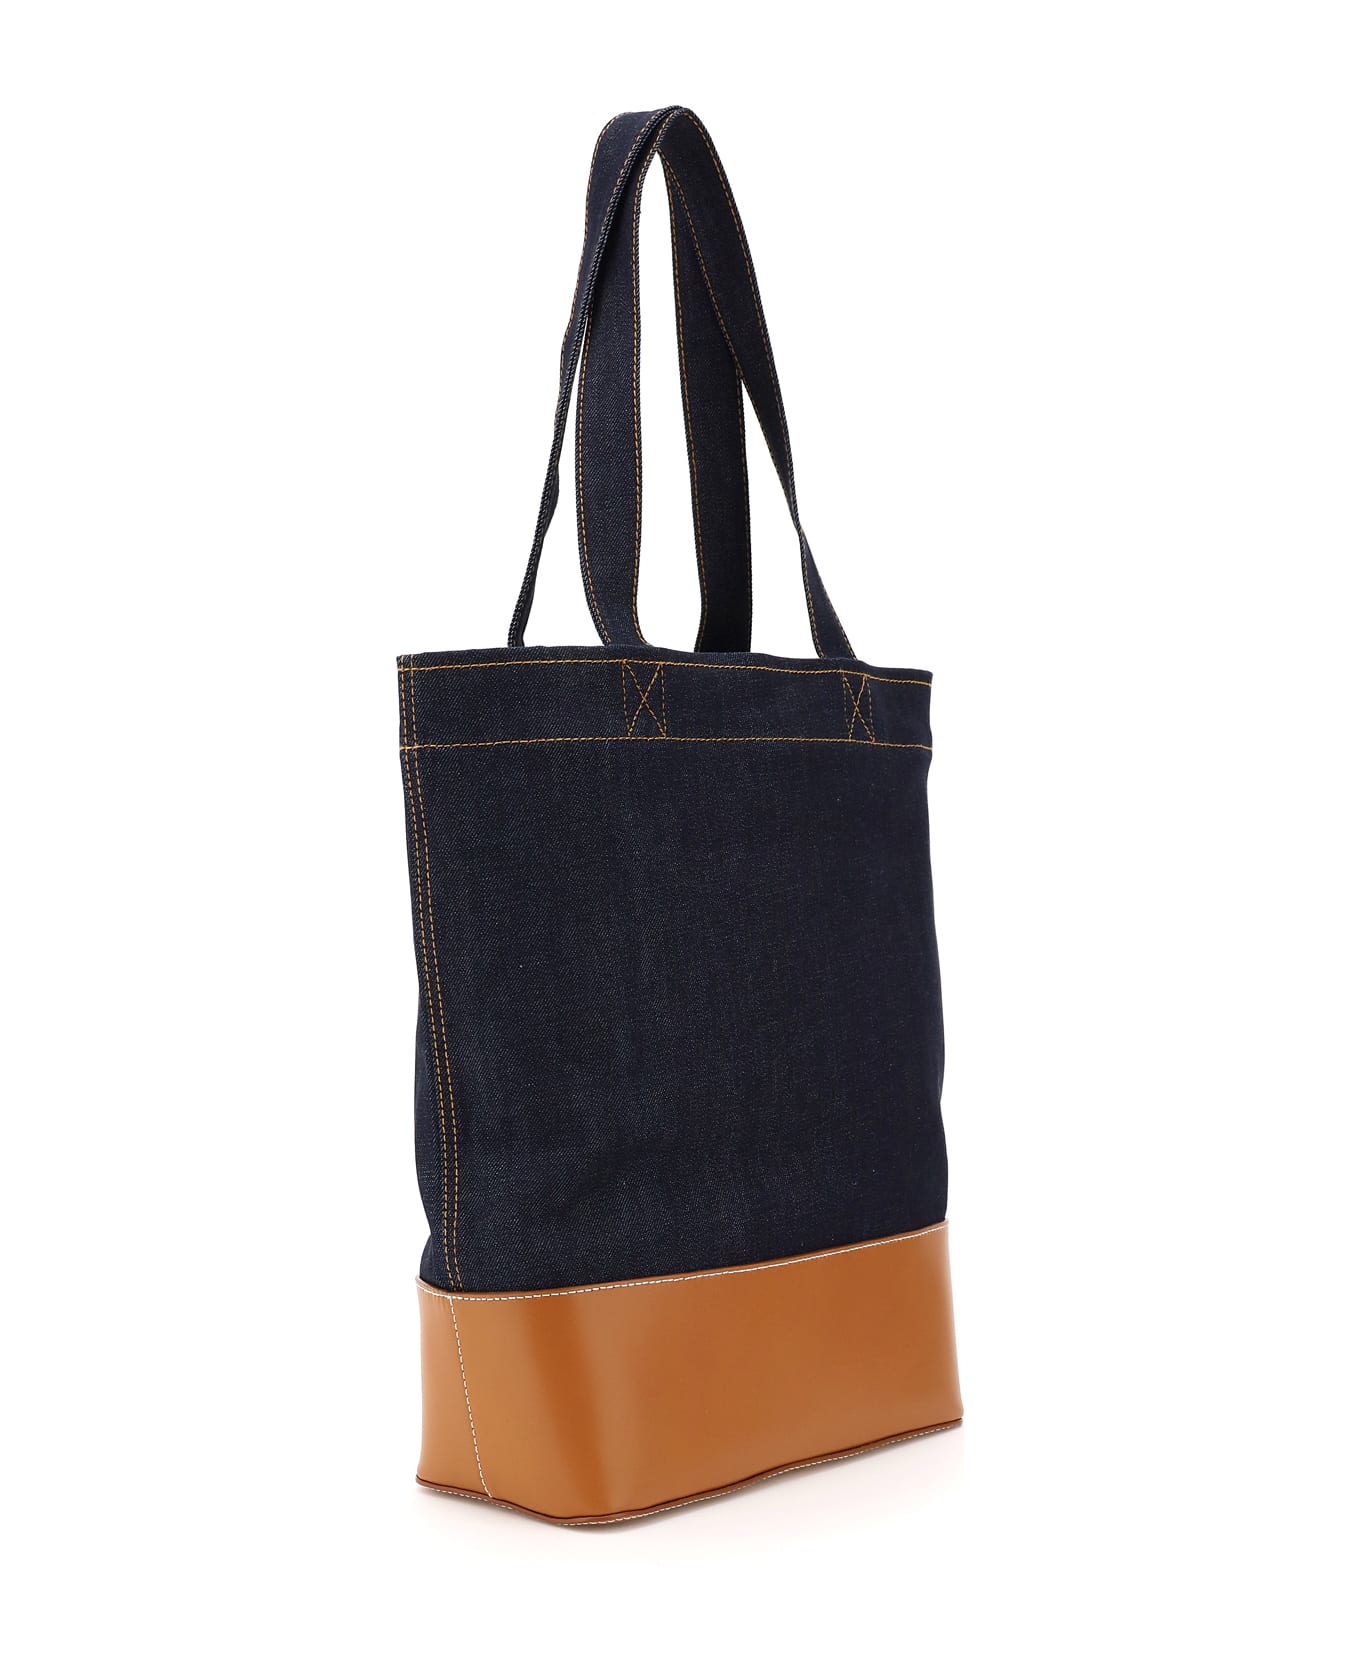 A.P.C. Axelle Tote Bag - Brown